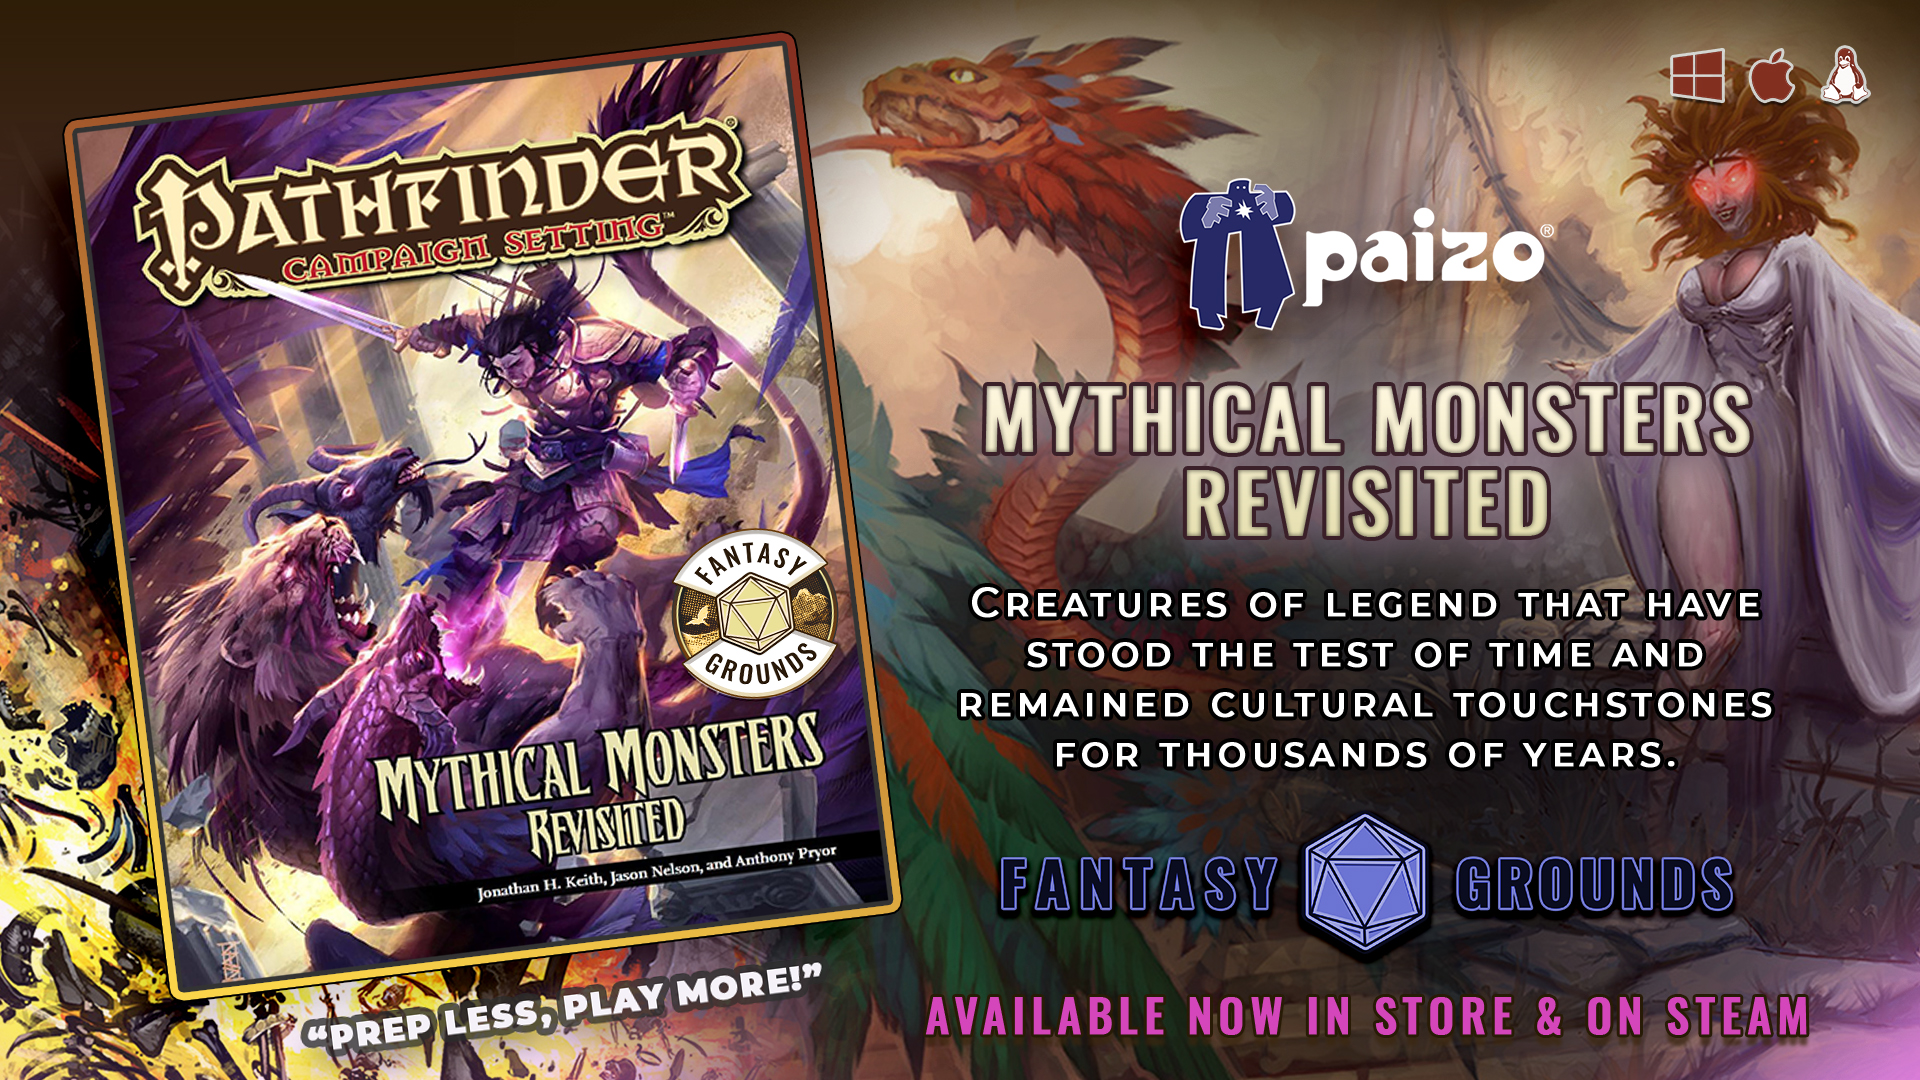 Pathfinder RPG - Campaign Setting Mythical Monsters Revisited(PZOSMWPZO9241FG).jpg